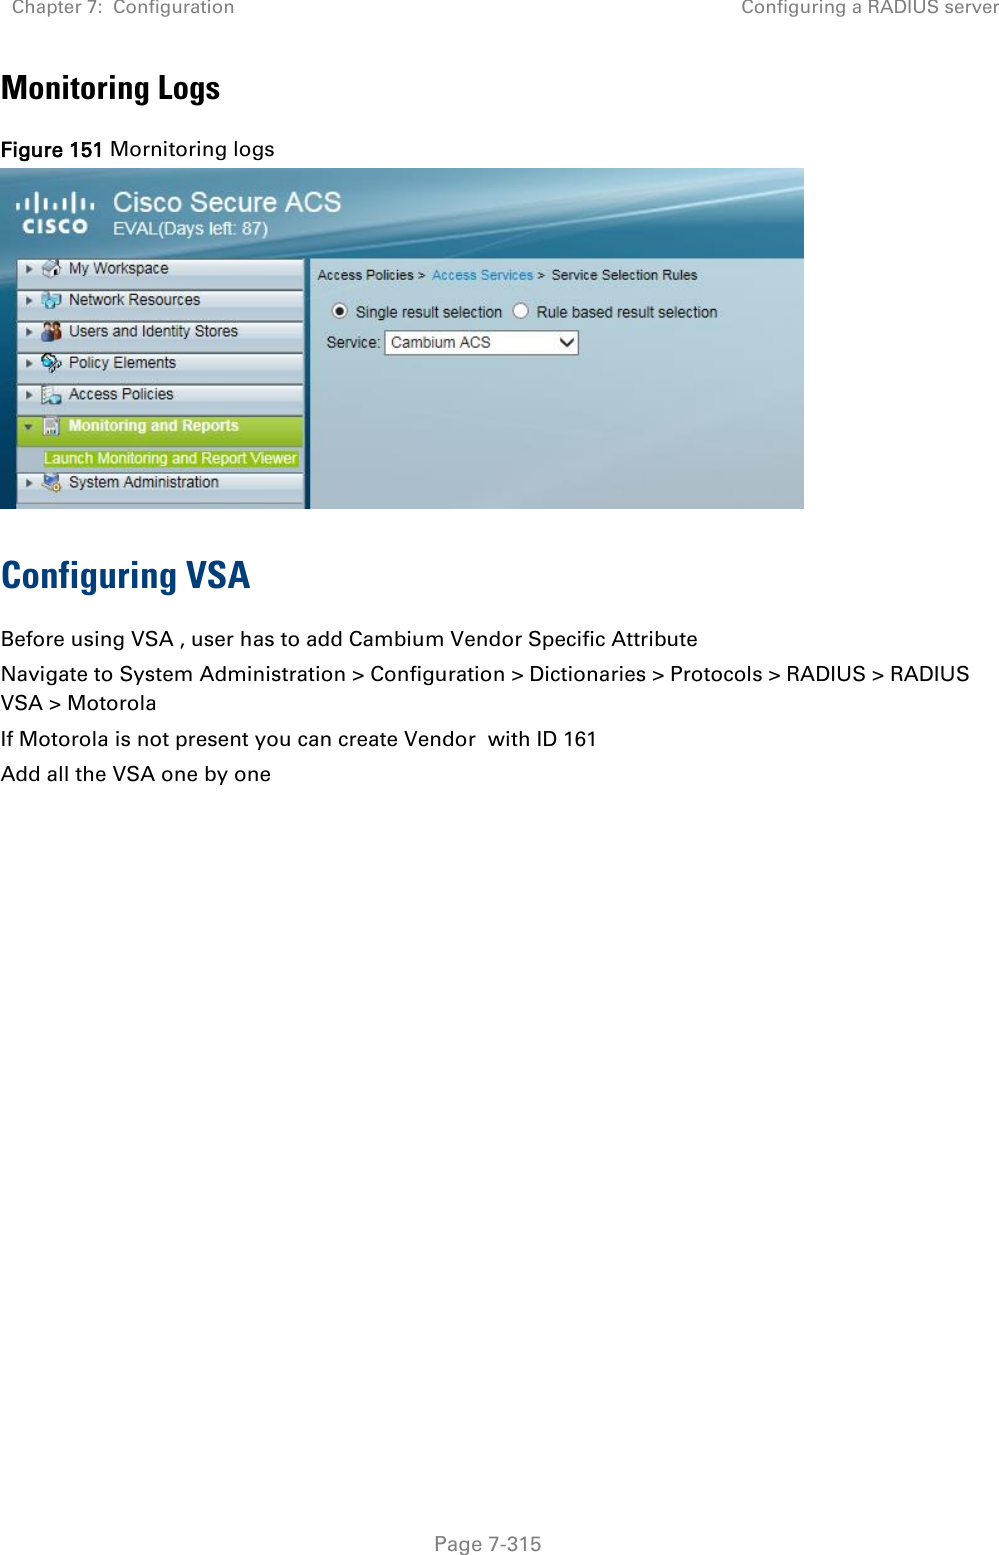 Chapter 7:  Configuration Configuring a RADIUS server   Page 7-315 Monitoring Logs Figure 151 Mornitoring logs  Configuring VSA Before using VSA , user has to add Cambium Vendor Specific Attribute Navigate to System Administration &gt; Configuration &gt; Dictionaries &gt; Protocols &gt; RADIUS &gt; RADIUS VSA &gt; Motorola If Motorola is not present you can create Vendor  with ID 161 Add all the VSA one by one   